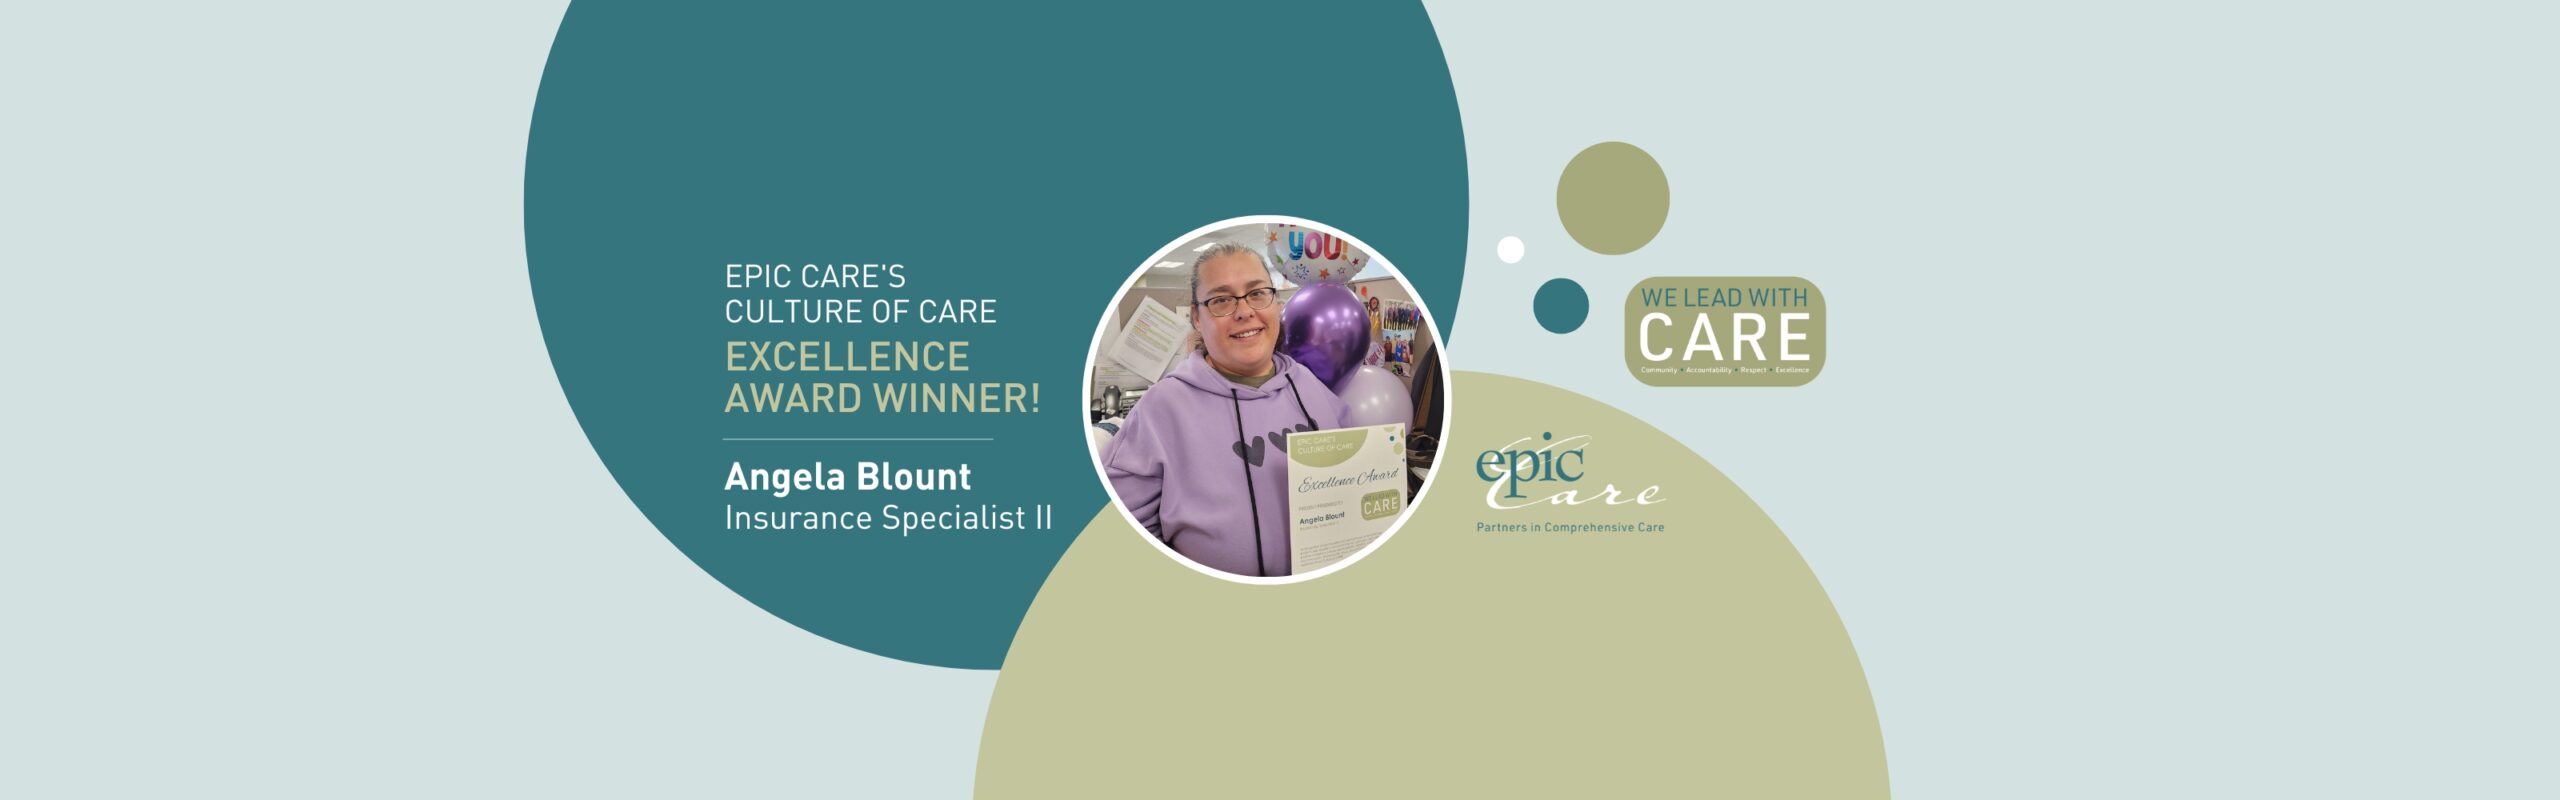 Epic Care’s Culture of CARE Excellence Award Winner! – Angela Blount